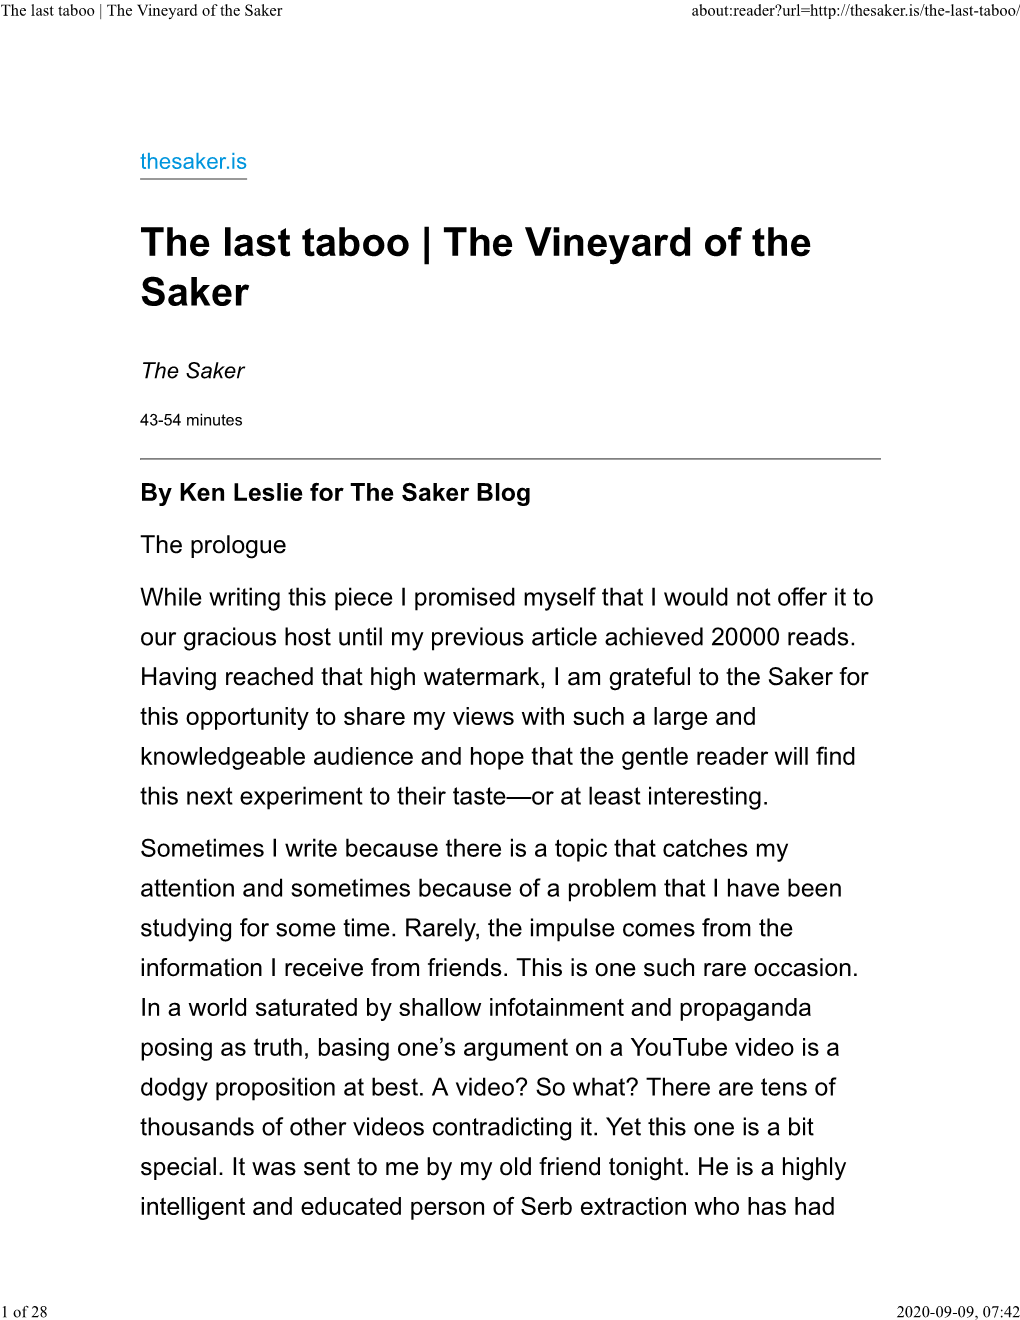 The Last Taboo | the Vineyard of the Saker About:Reader?Url=